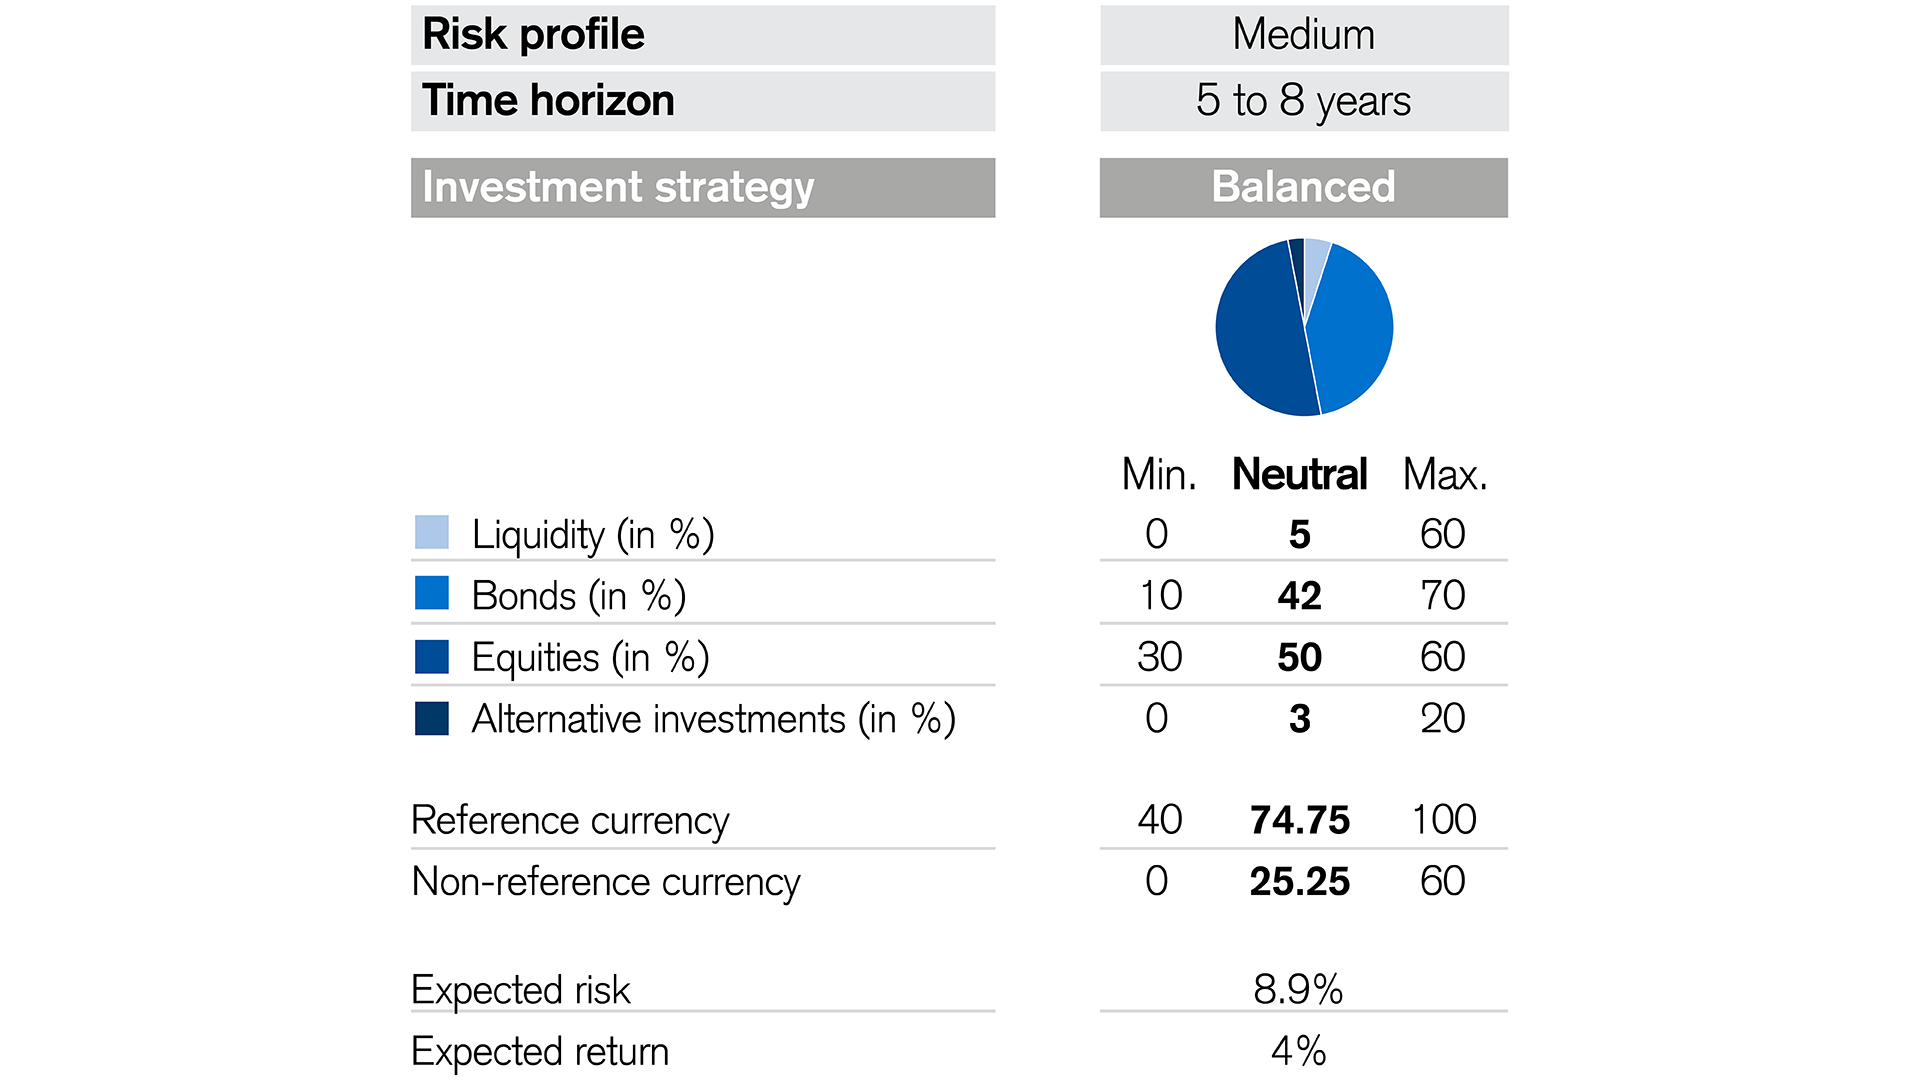 overview of the credit Suisse interest & dividend focus fund